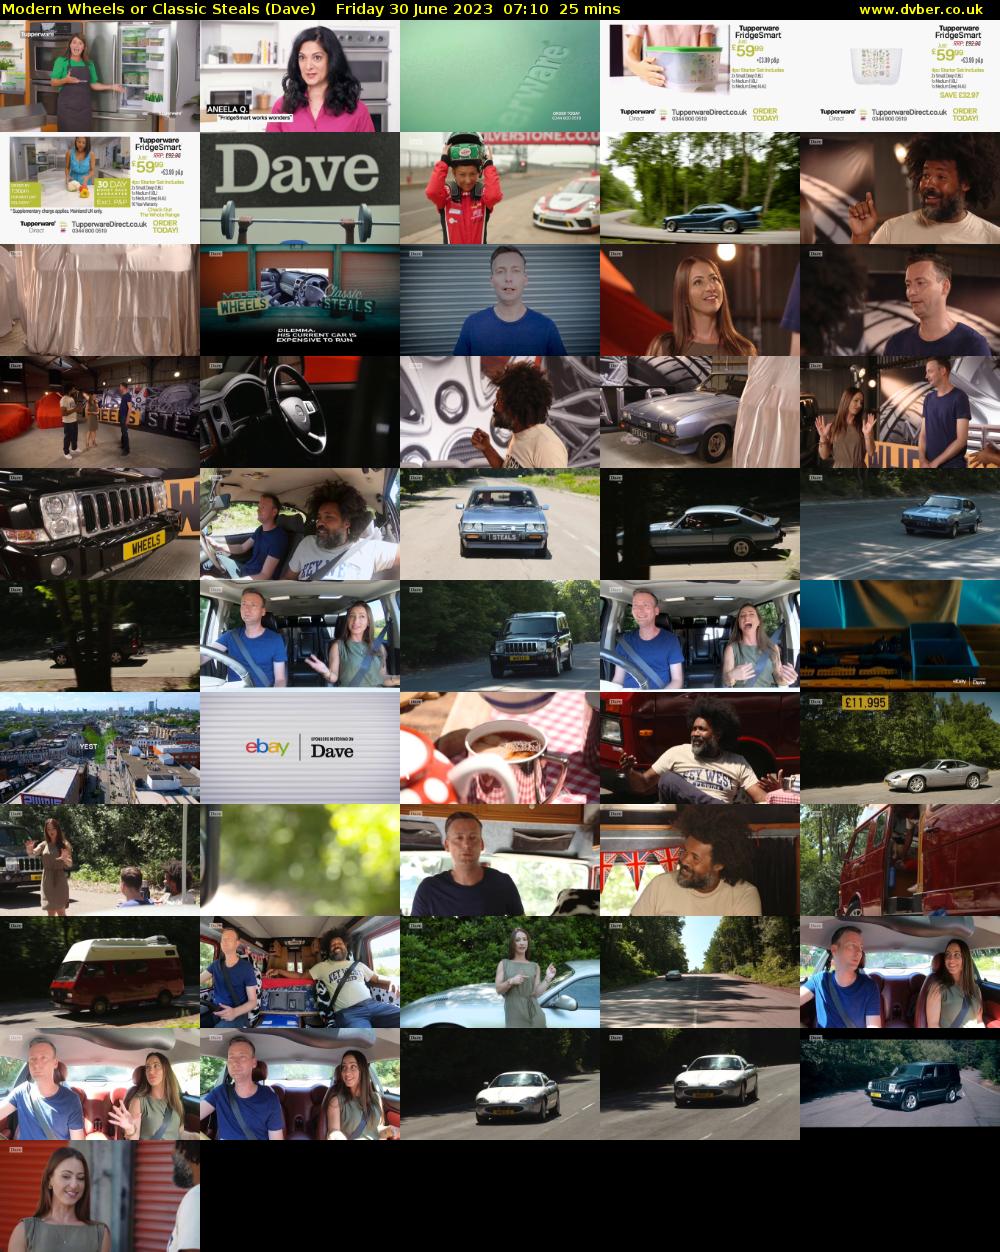 Modern Wheels or Classic Steals (Dave) Friday 30 June 2023 07:10 - 07:35